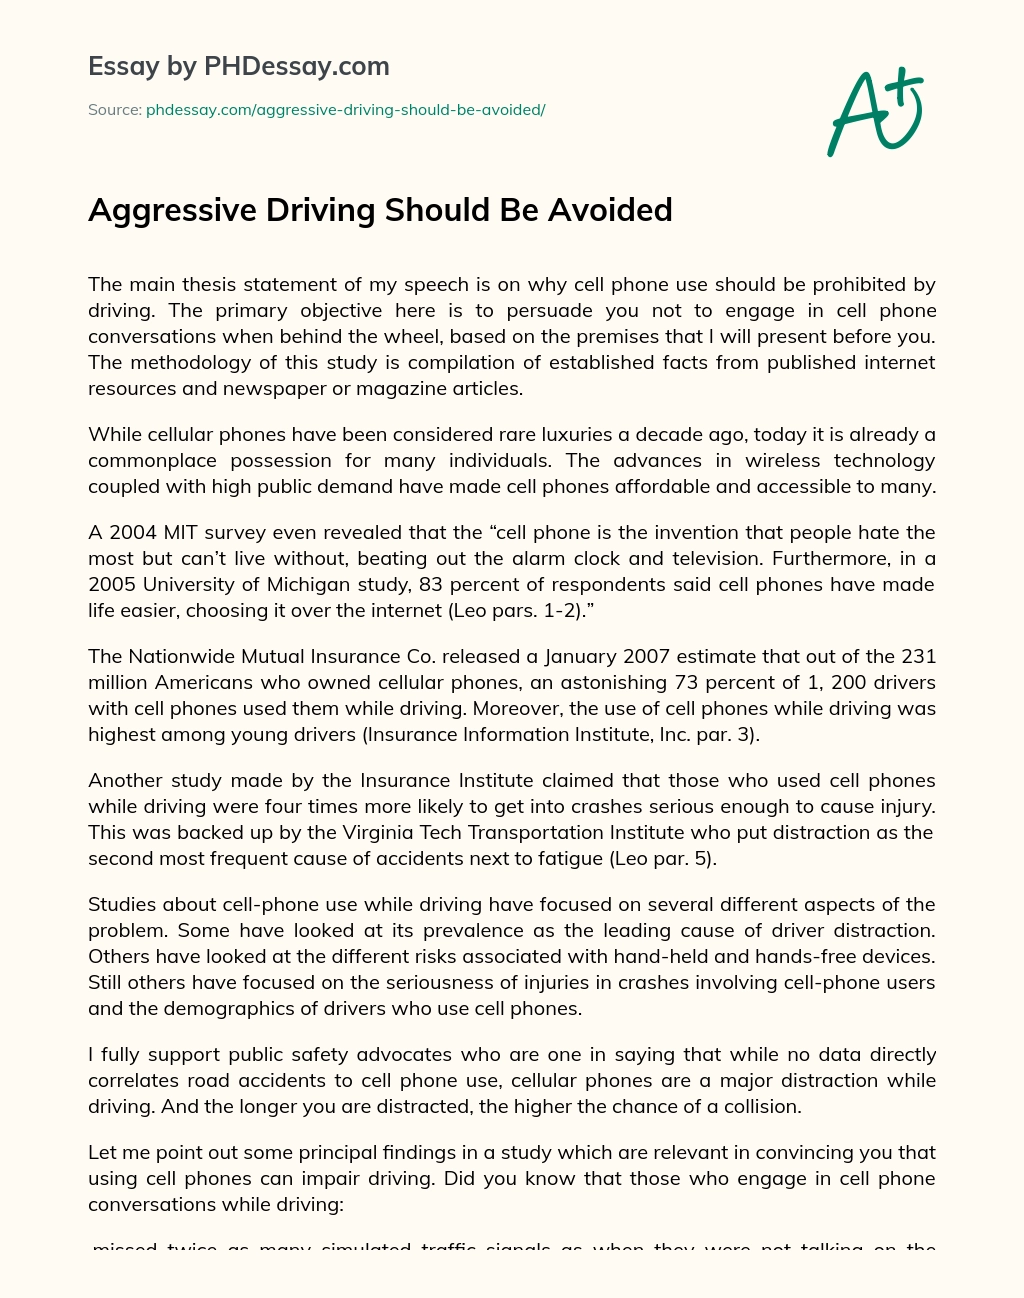 Aggressive Driving Should Be Avoided essay